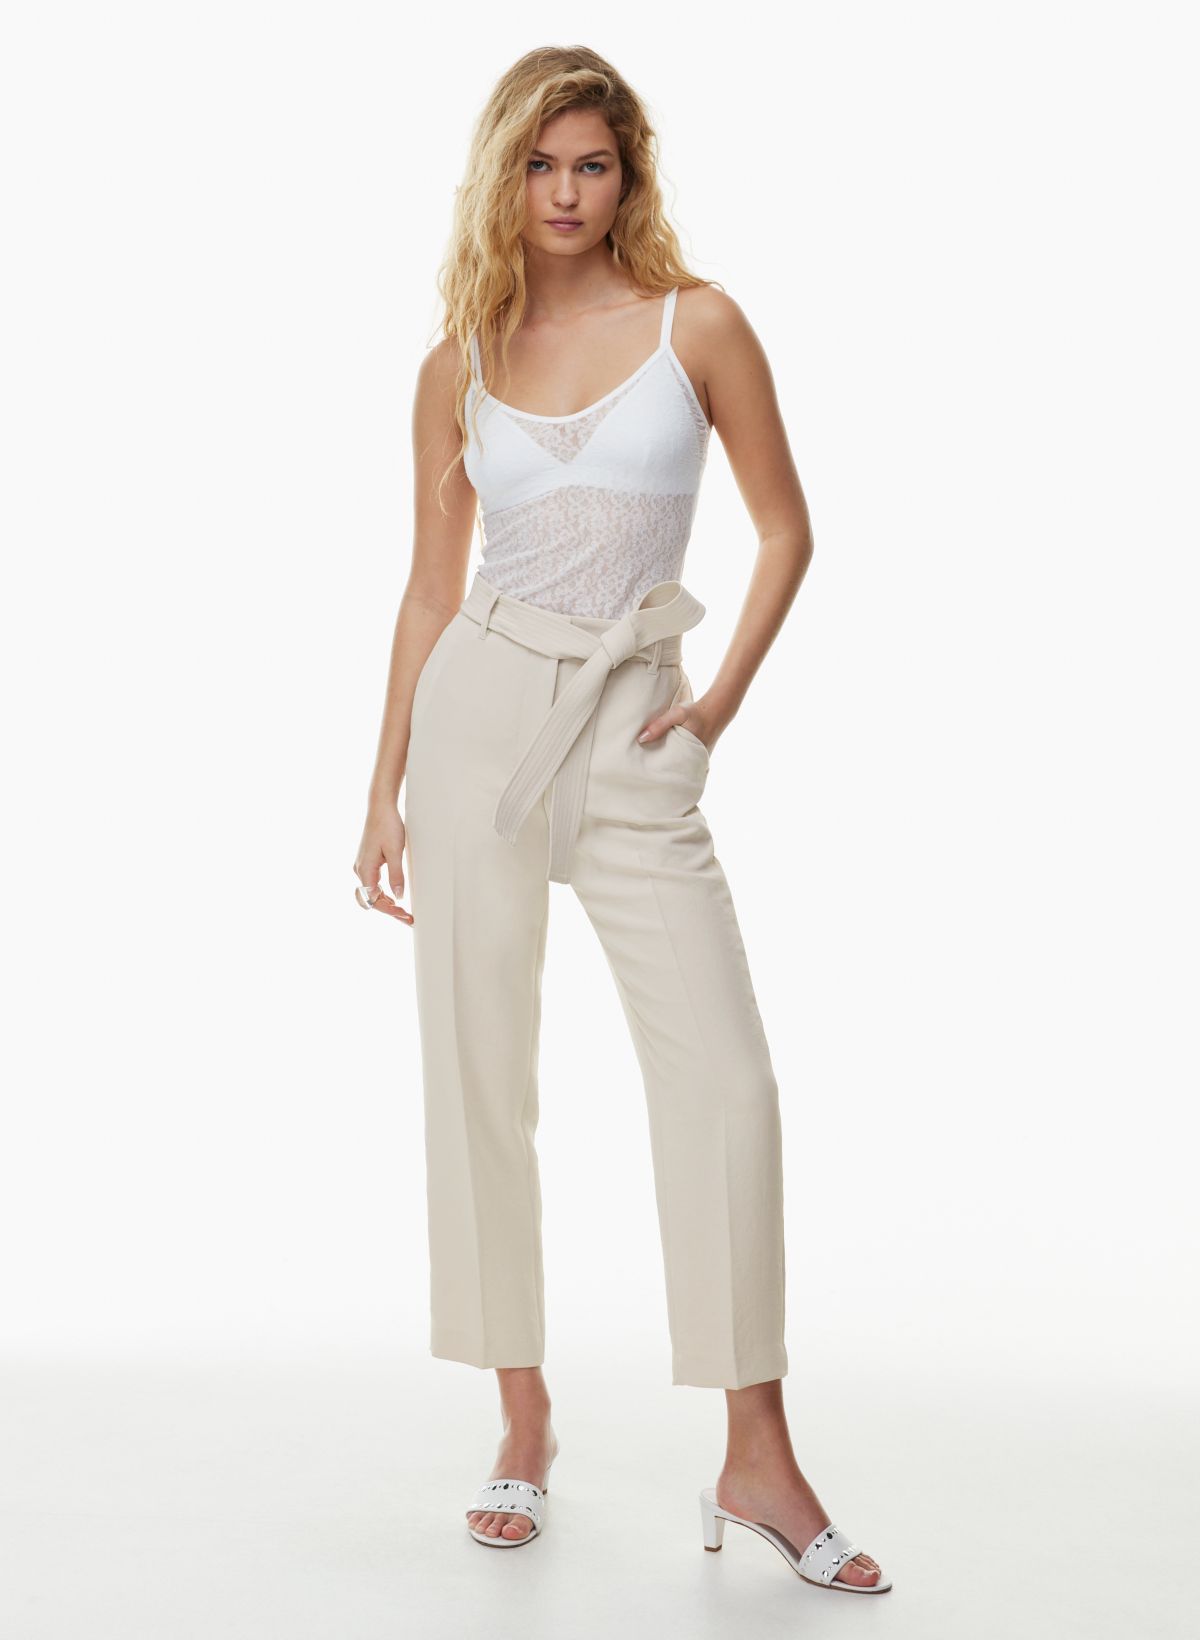 Unique 21 beach crop top and flared pants set in white